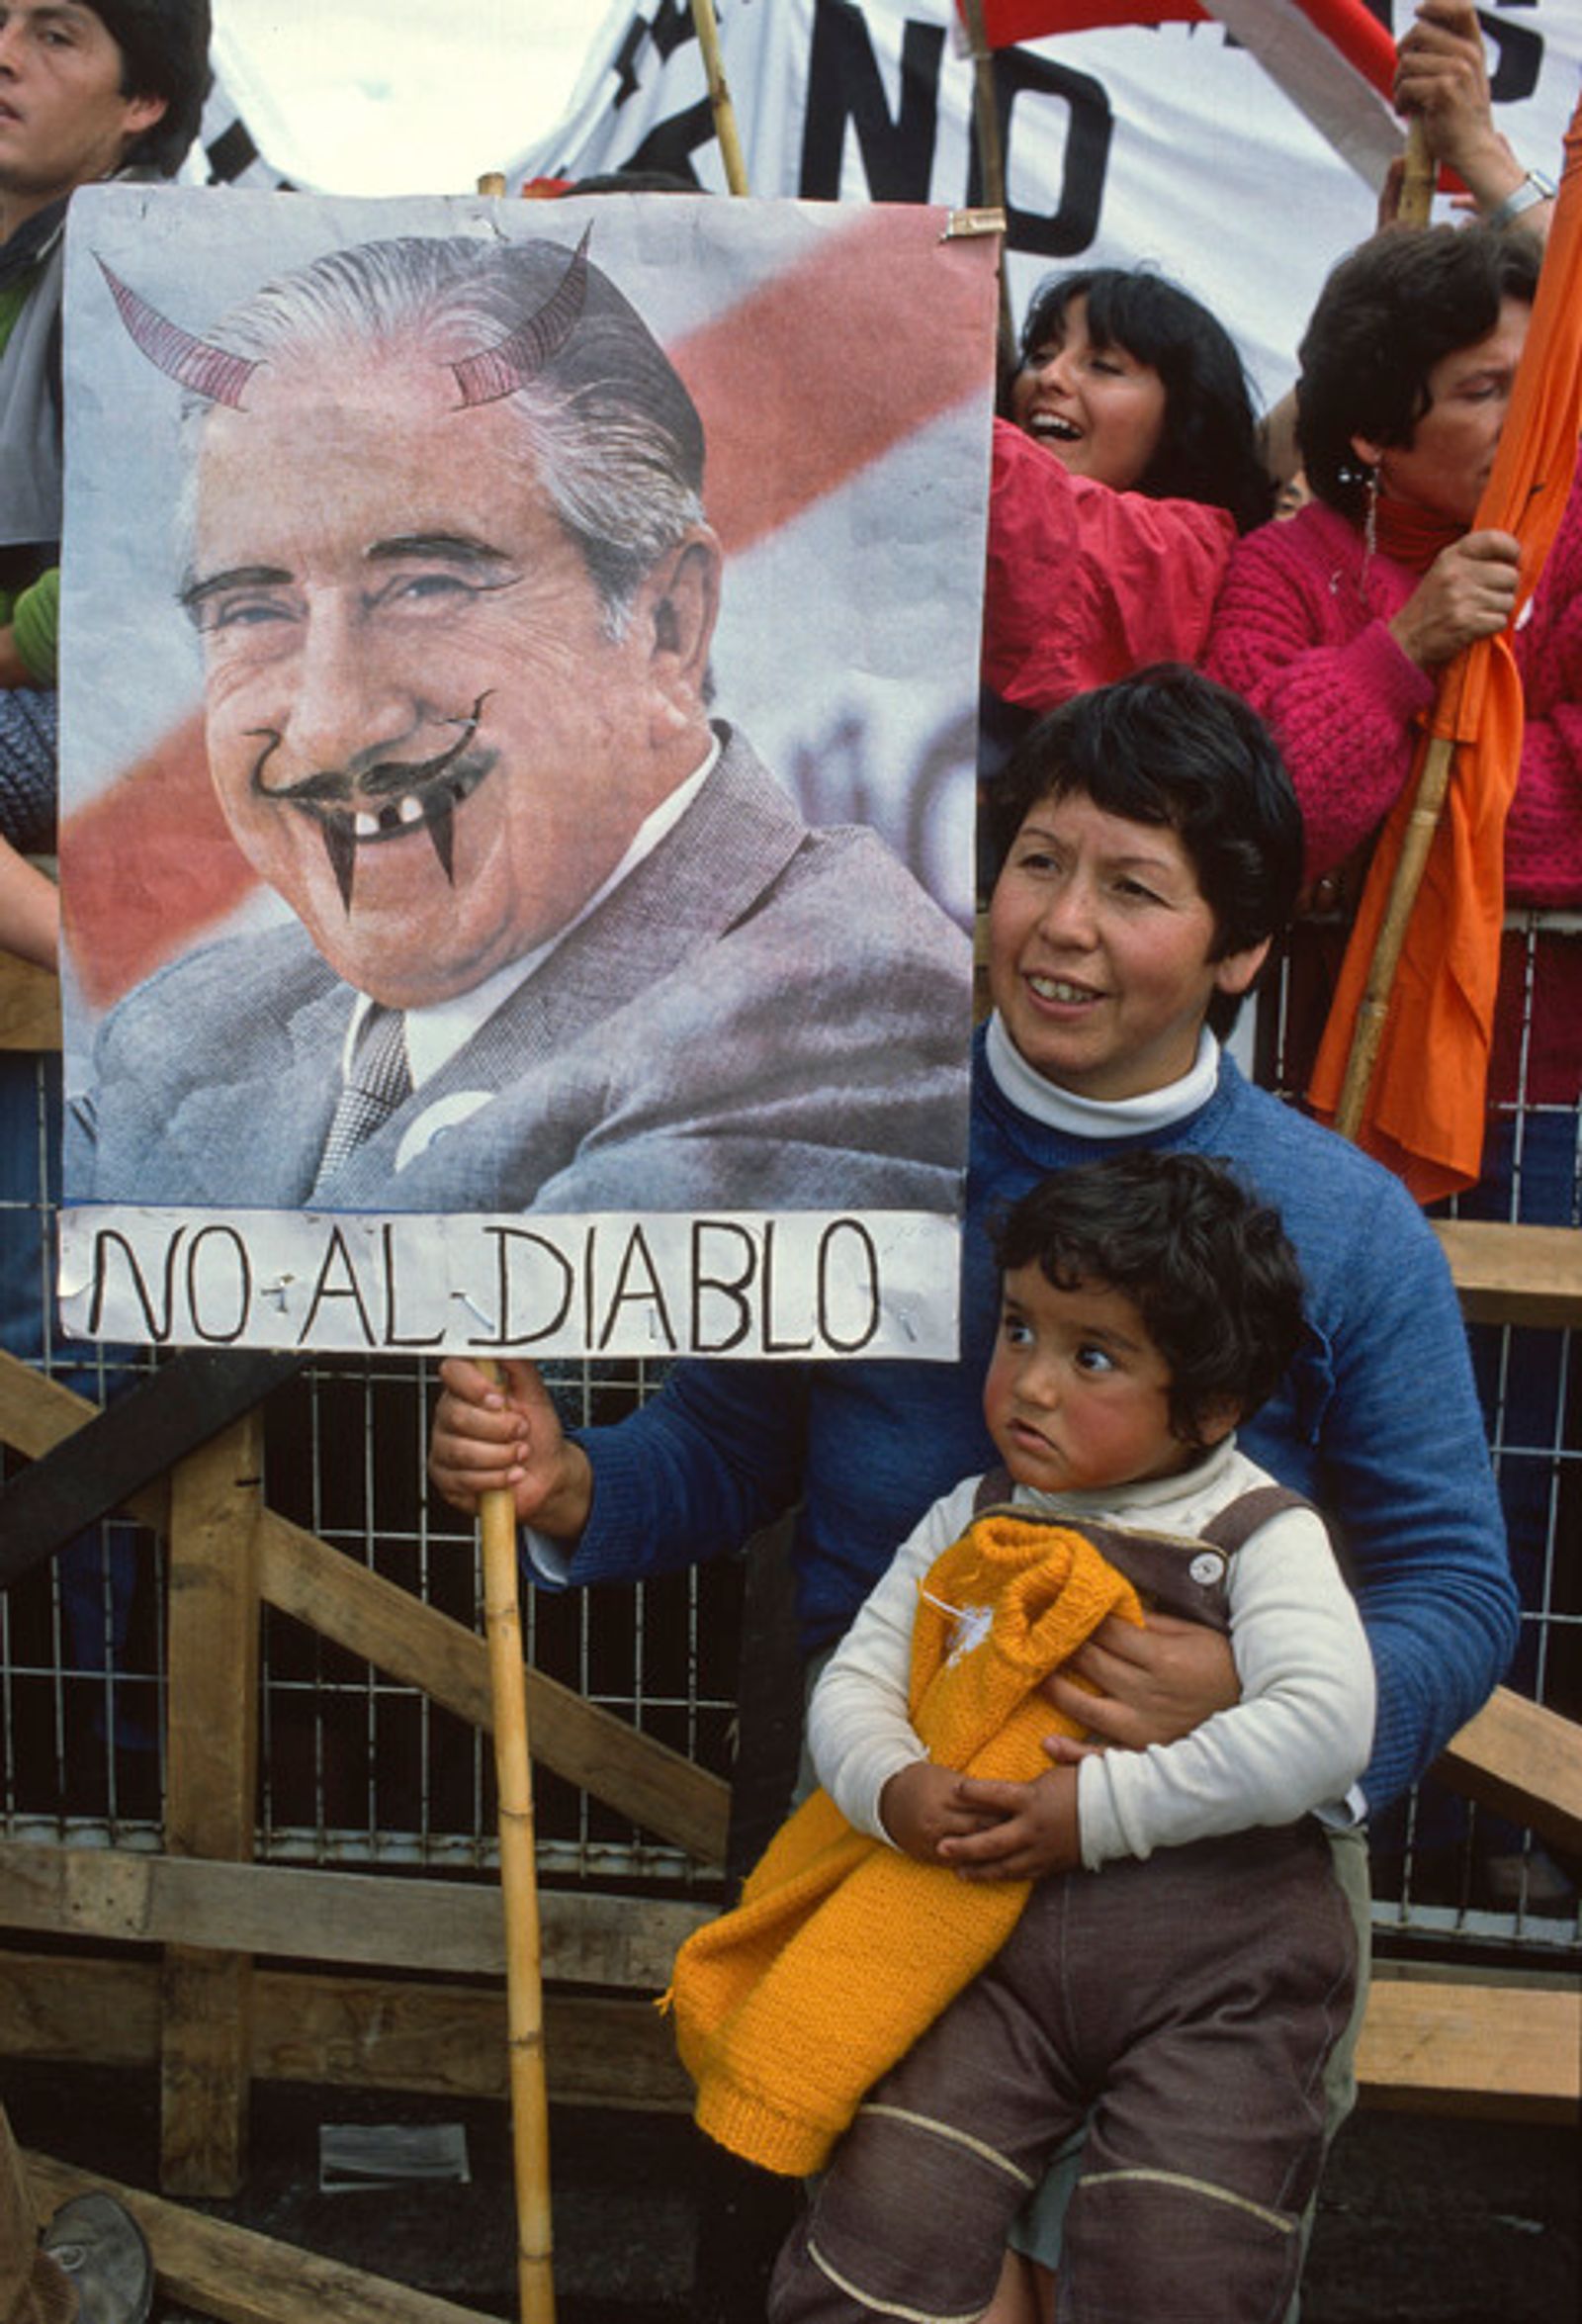 © Julio Etchart - Image from the Resistance against Pinochet in Chile in the 1980s. photography project